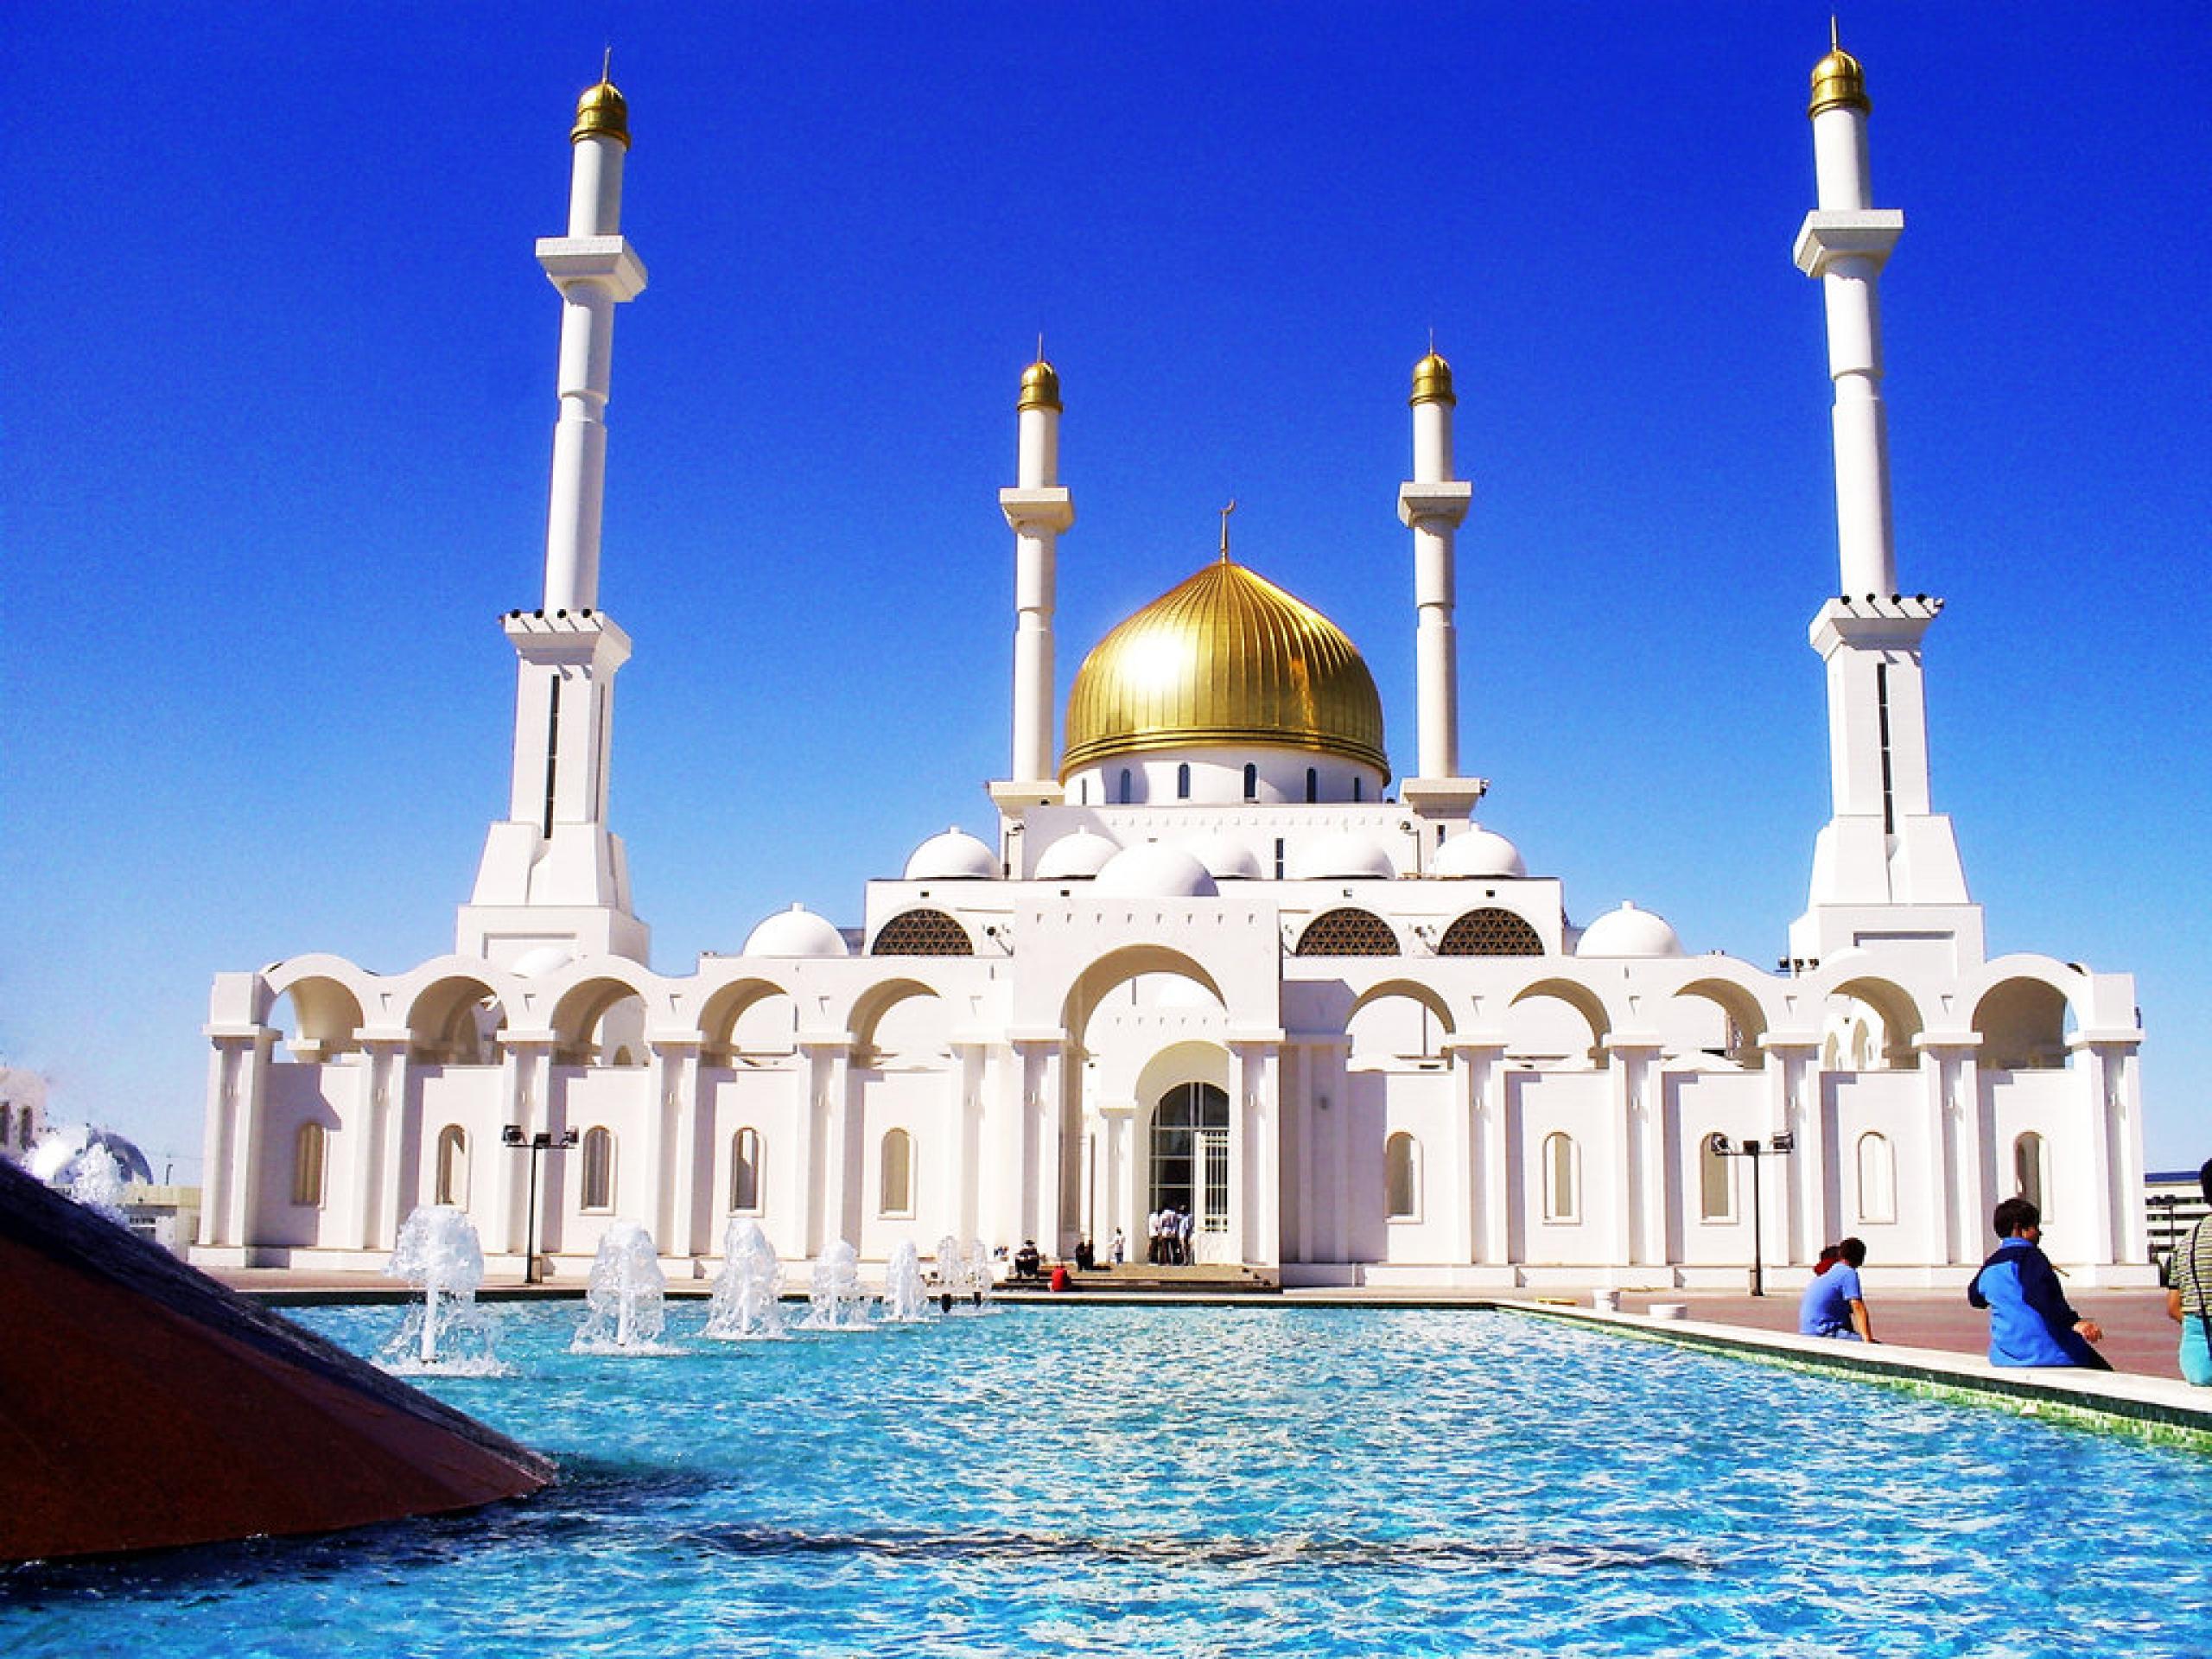 HD Wallpaper Source Beautiful Mosque Pictures In The World